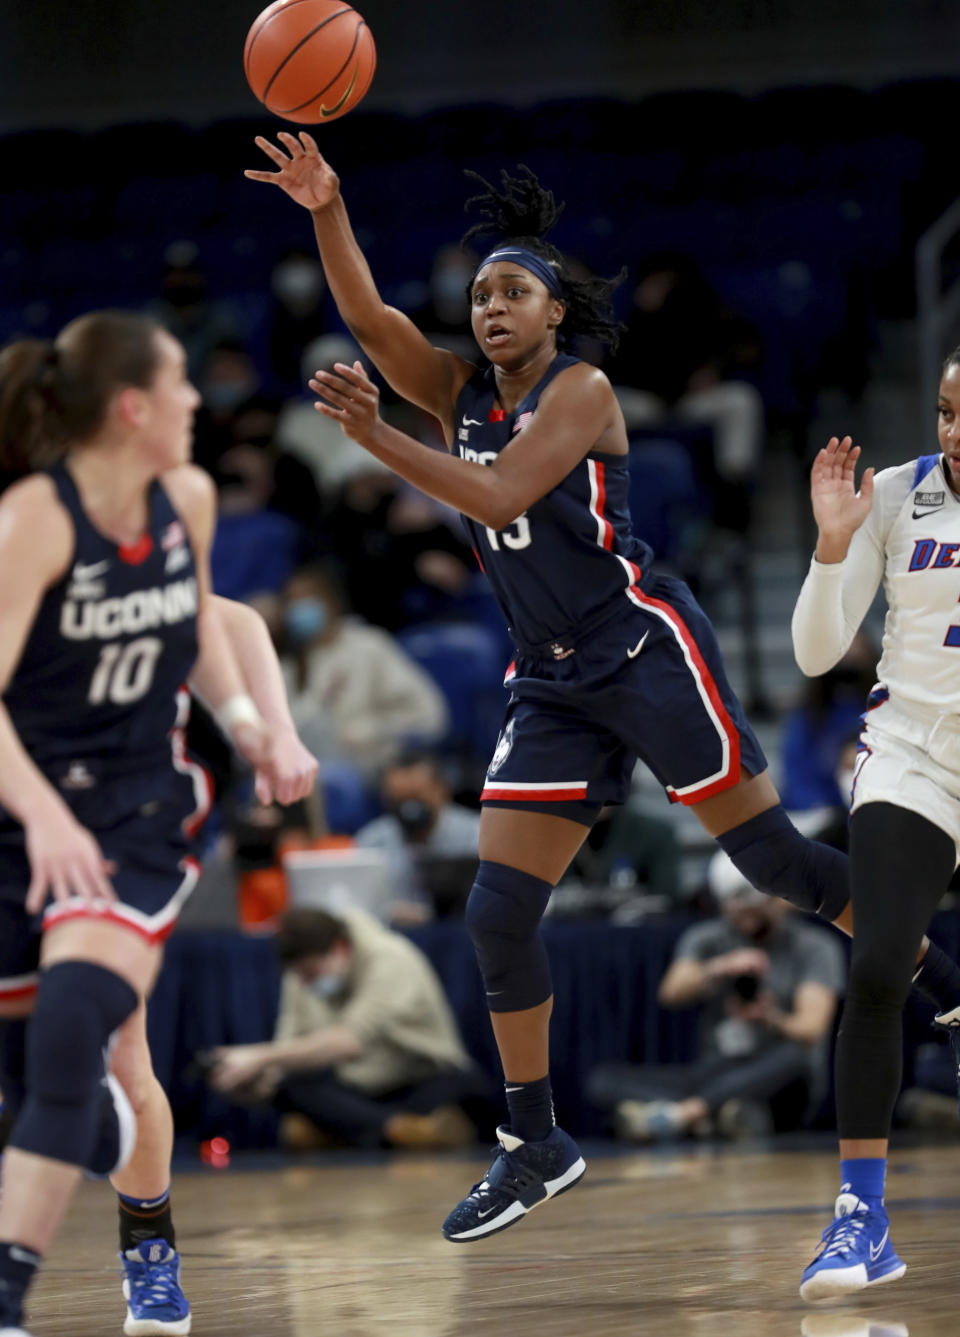 Connecticut guard Christyn Williams (13) makes a pass against DePaul in the first half of an NCAA college basketball game at Wintrust Arena in Chicago on Wednesday, Jan. 26, 2022. (Chris Sweda/Chicago Tribune via AP)